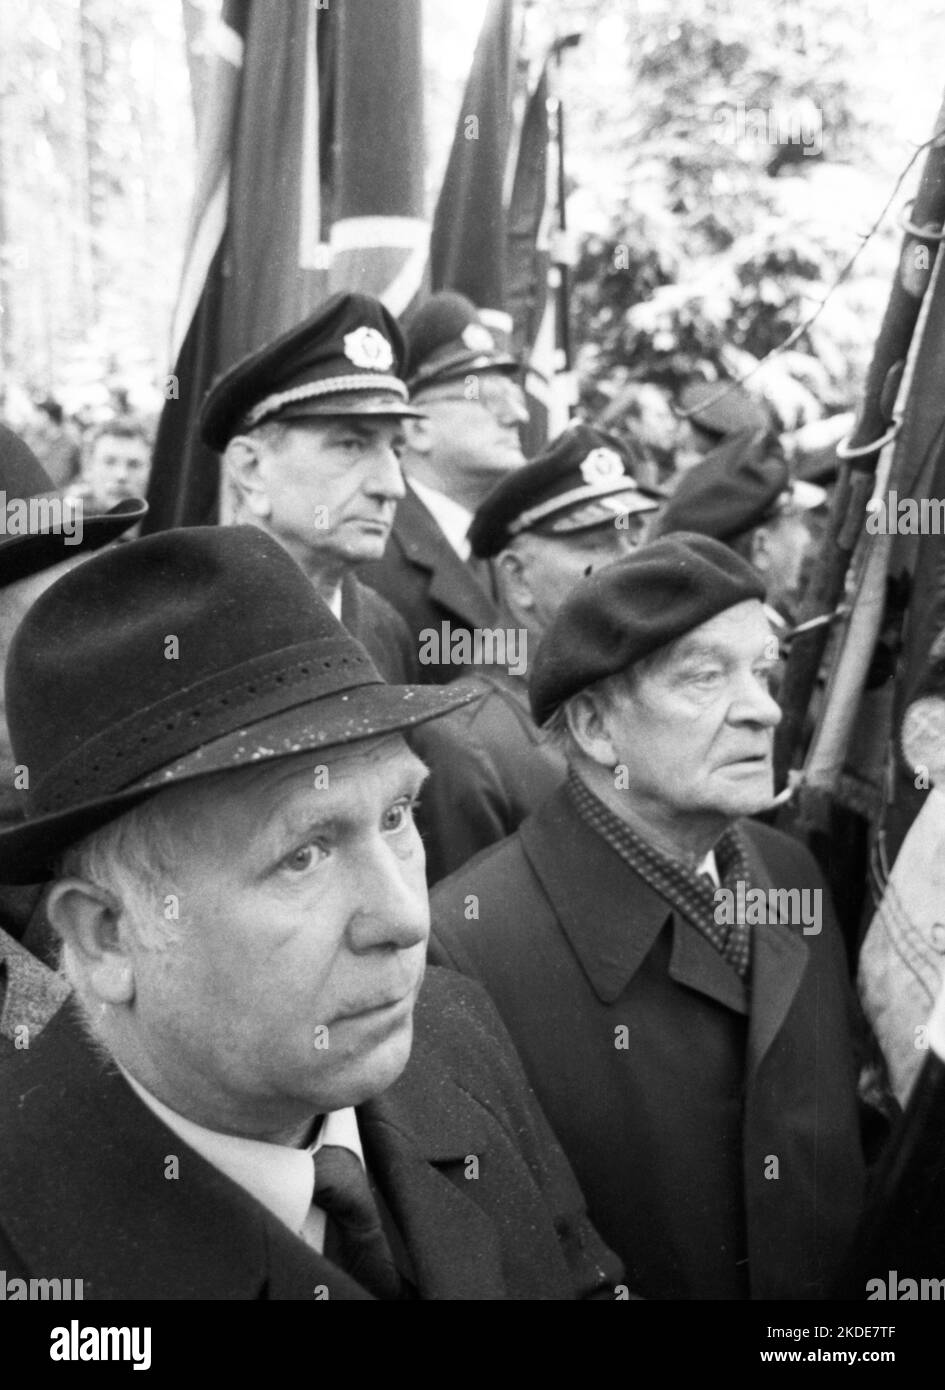 The funeral of Grand Admiral Karl Doenitz, a Hitler confidant who was convicted as a war criminal by the Nuremberg court martial, turned into a Stock Photo